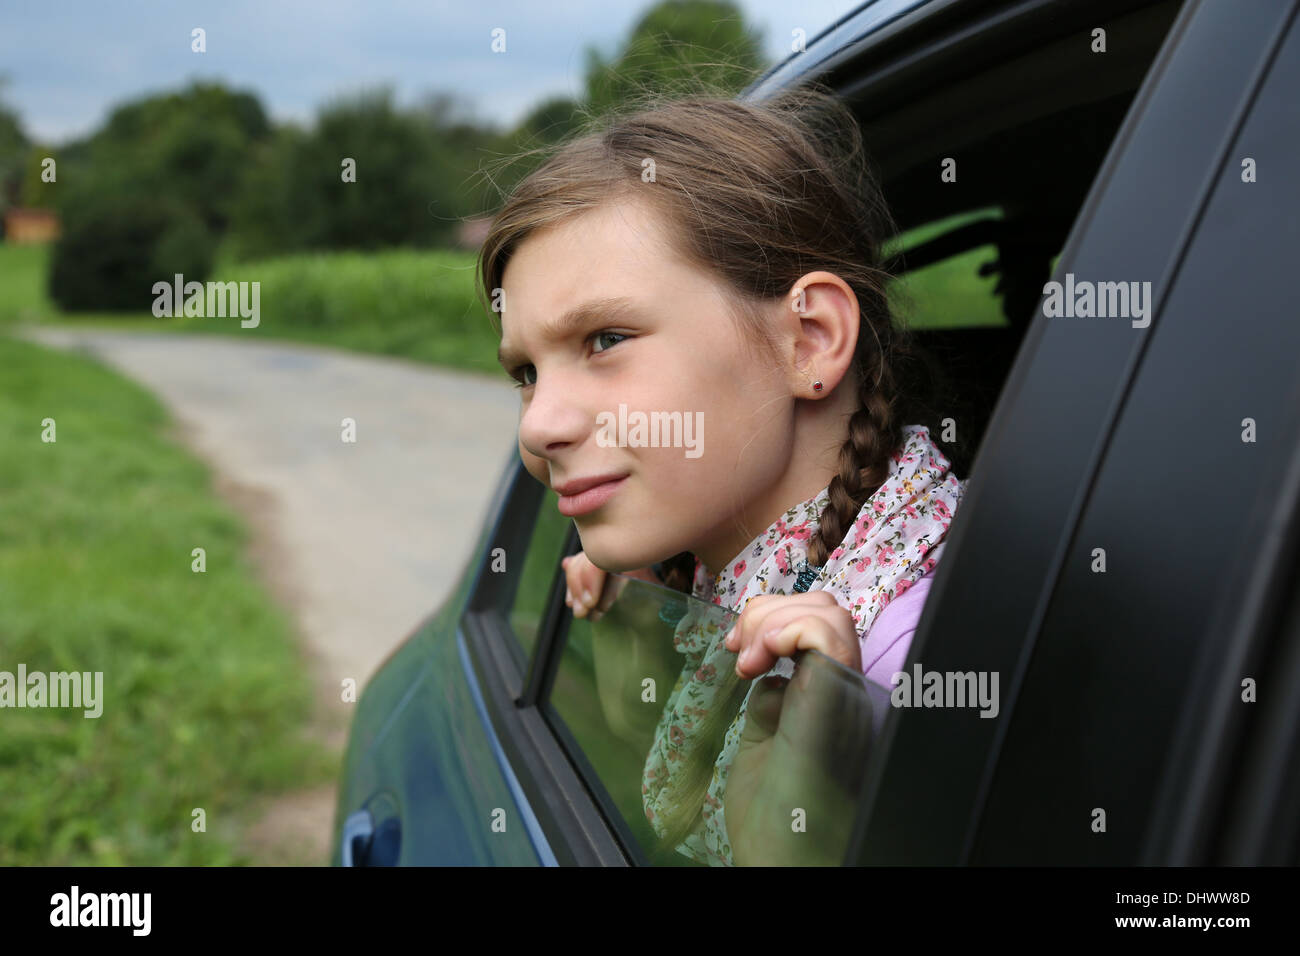 Little girl looking out of the window of a car while driving Stock Photo